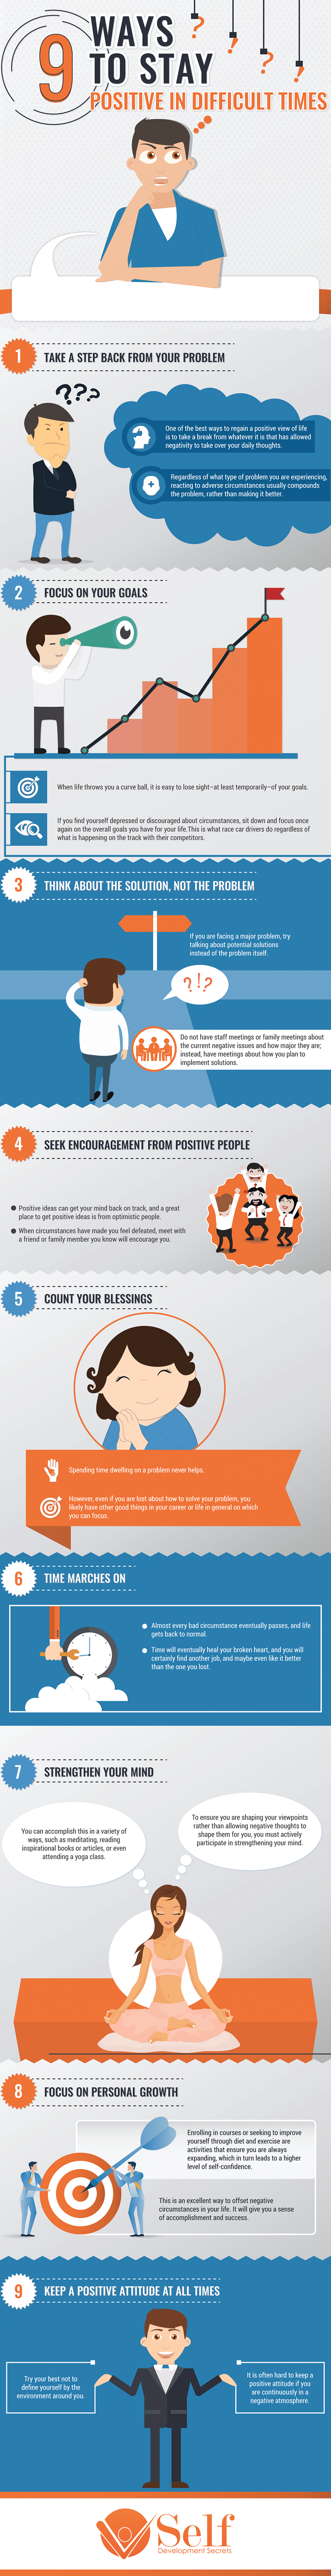 9 Ways To Stay Positive During Difficult Times [Infographic]